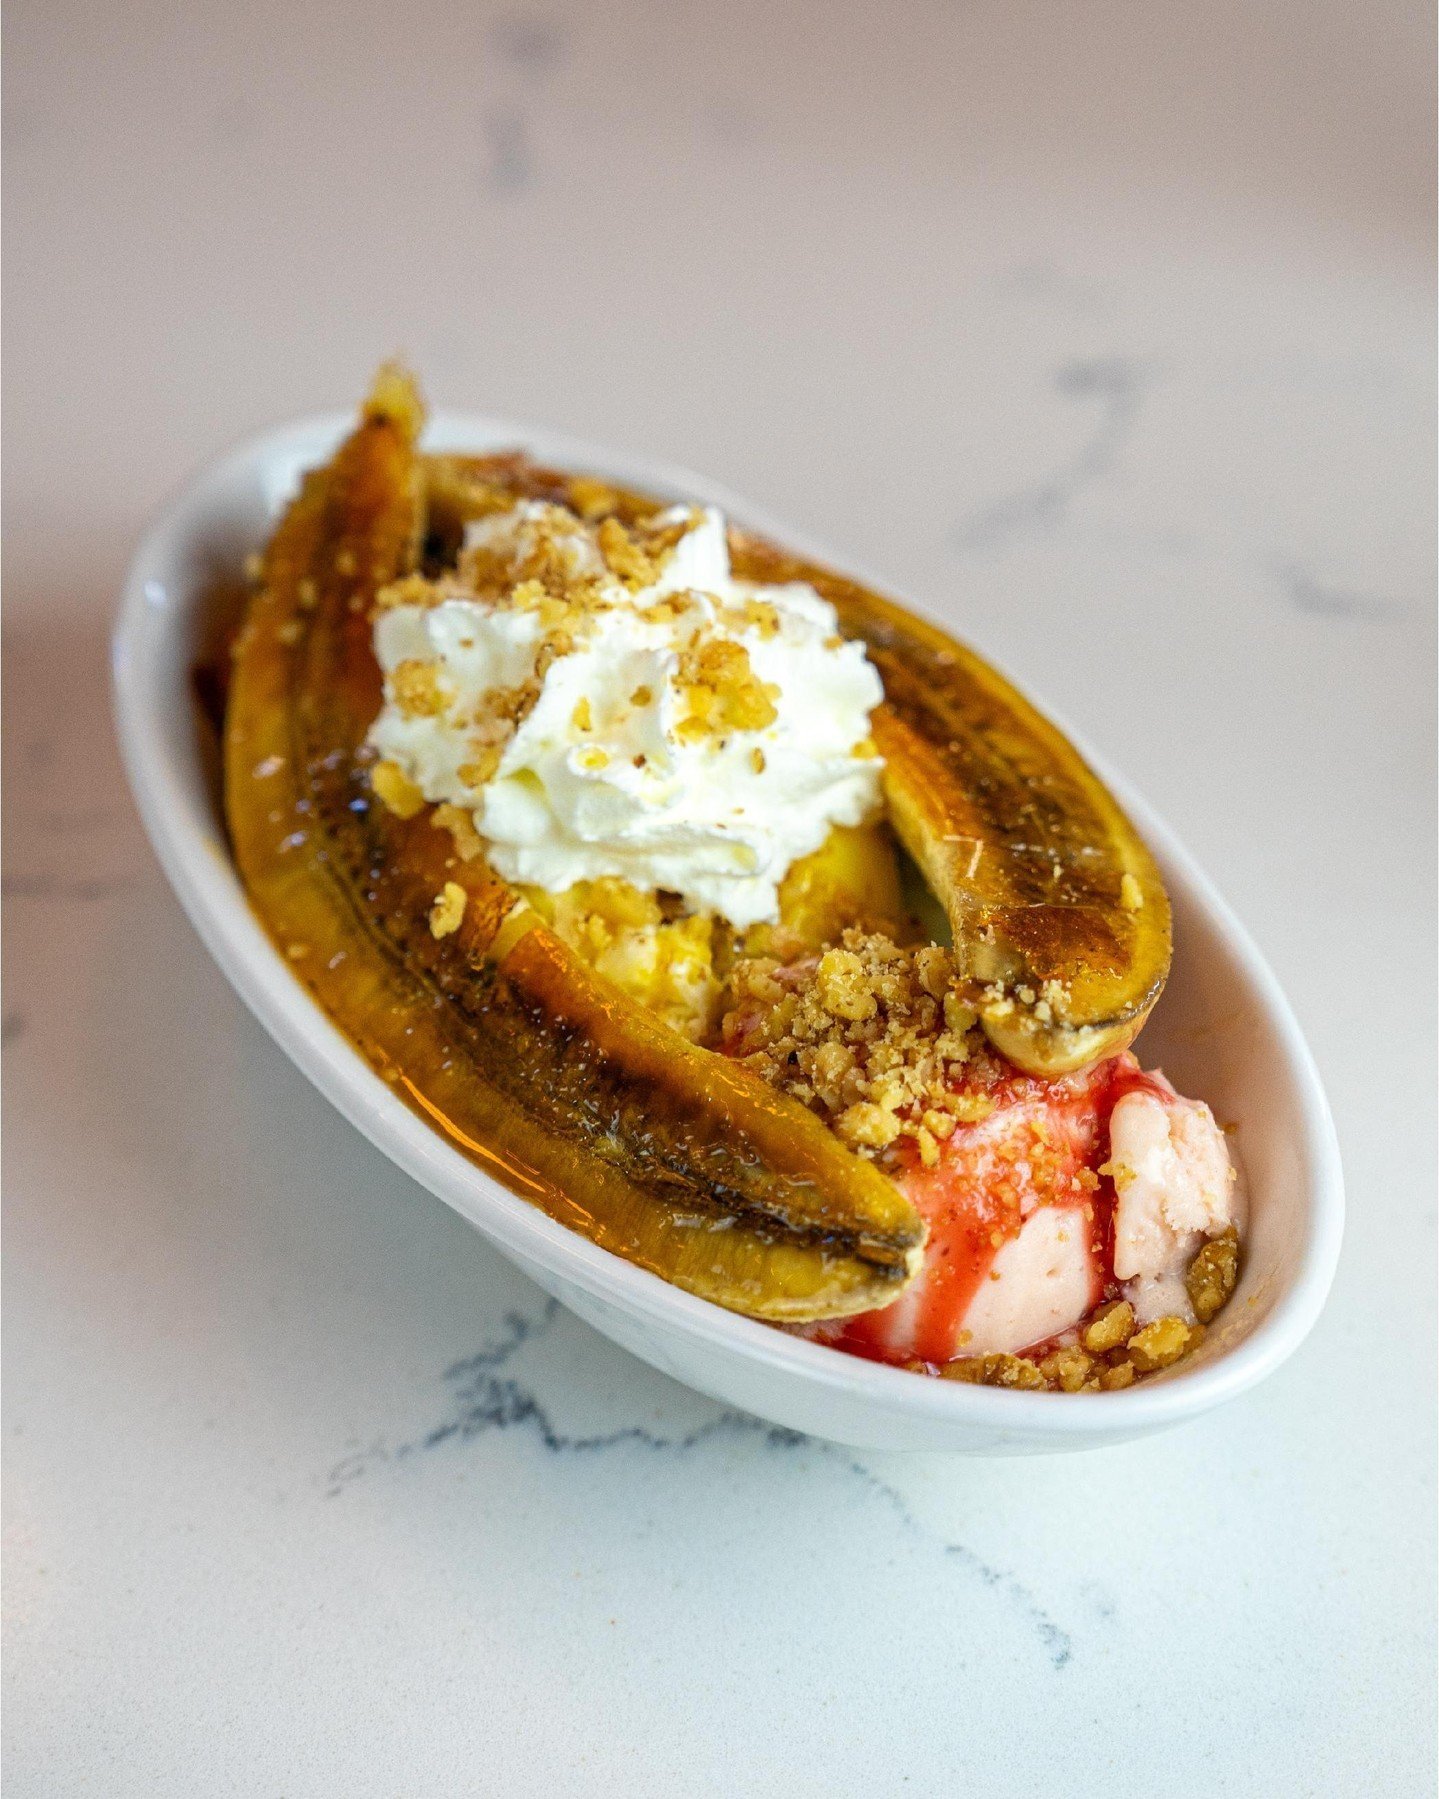 This weekend calls for a classic! 🍌

Come on in and try our banana split with chocolate, vanilla, &amp; strawberry ice cream, br&ucirc;l&eacute;e banana, whipped cream, and crushed peanuts! 

Open until 11pm tonight!